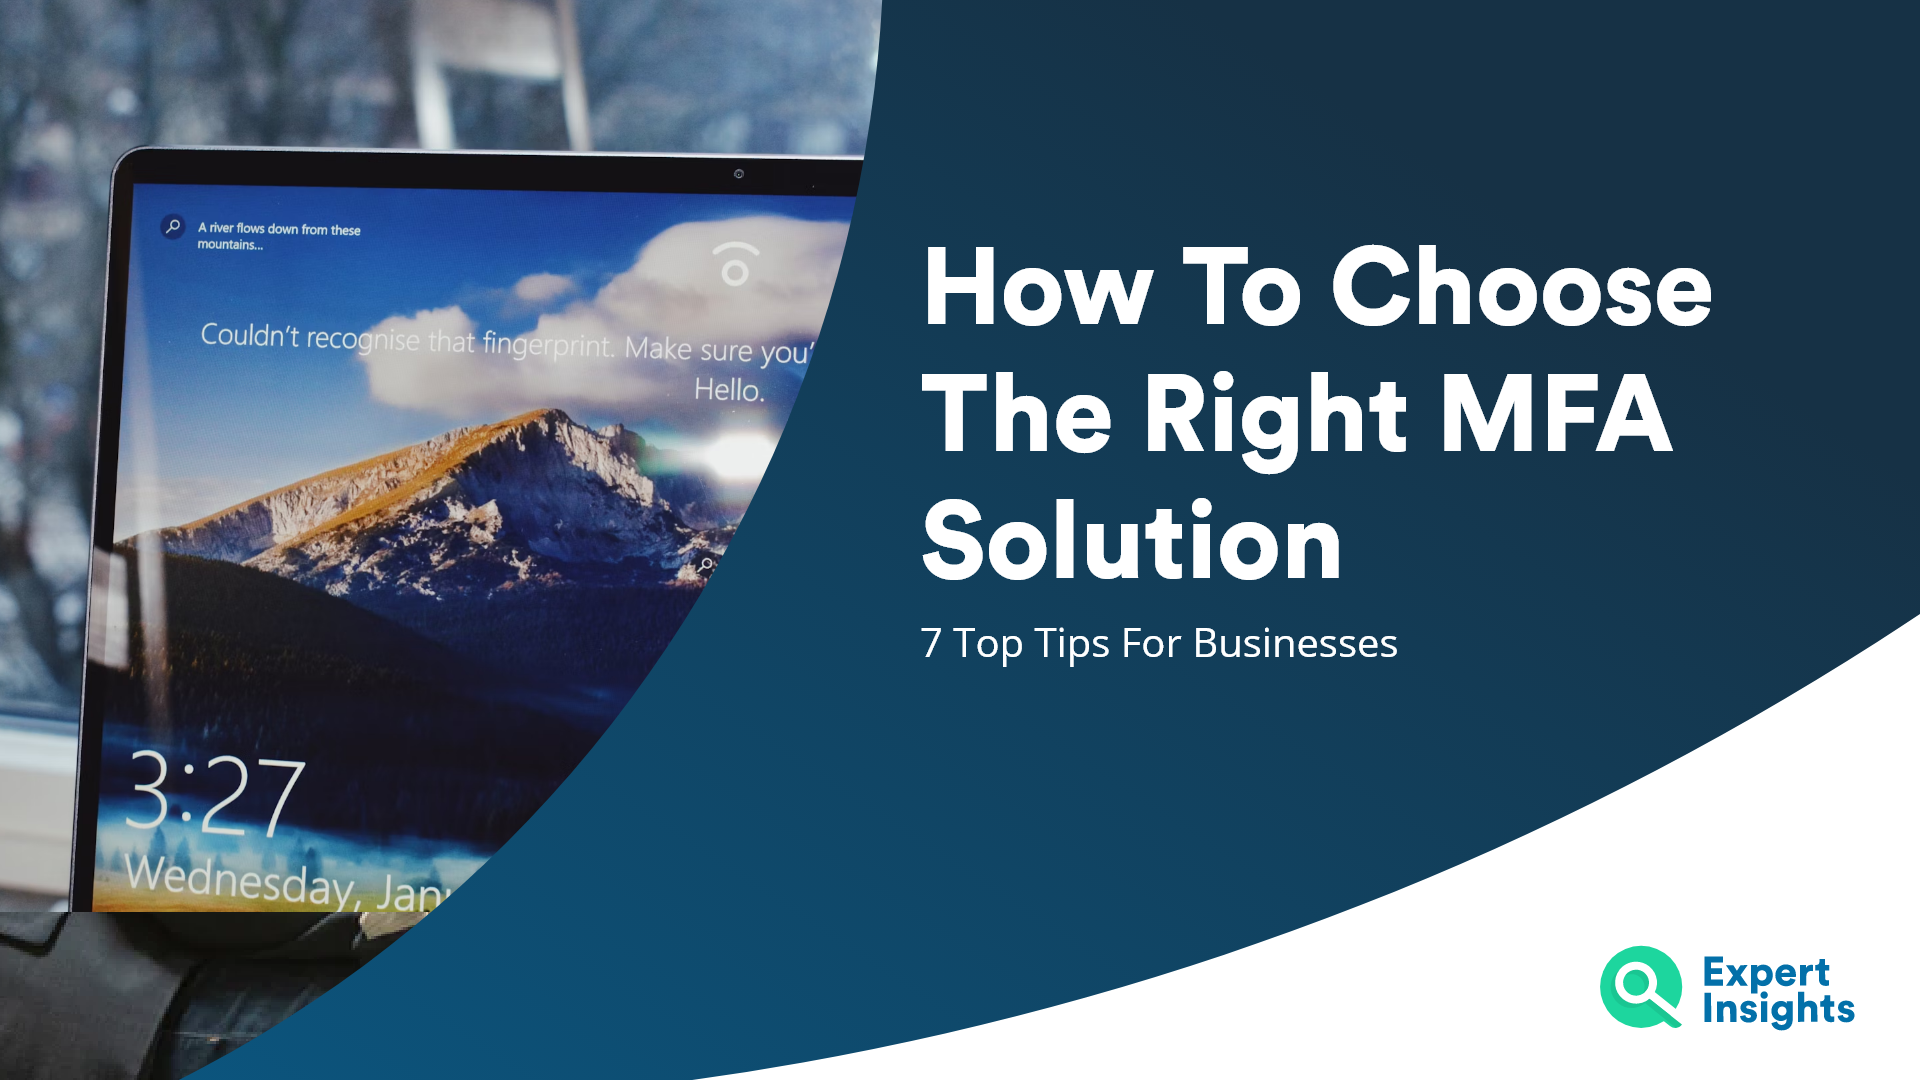 How To Choose The Right MFA Solution - Expert Insights